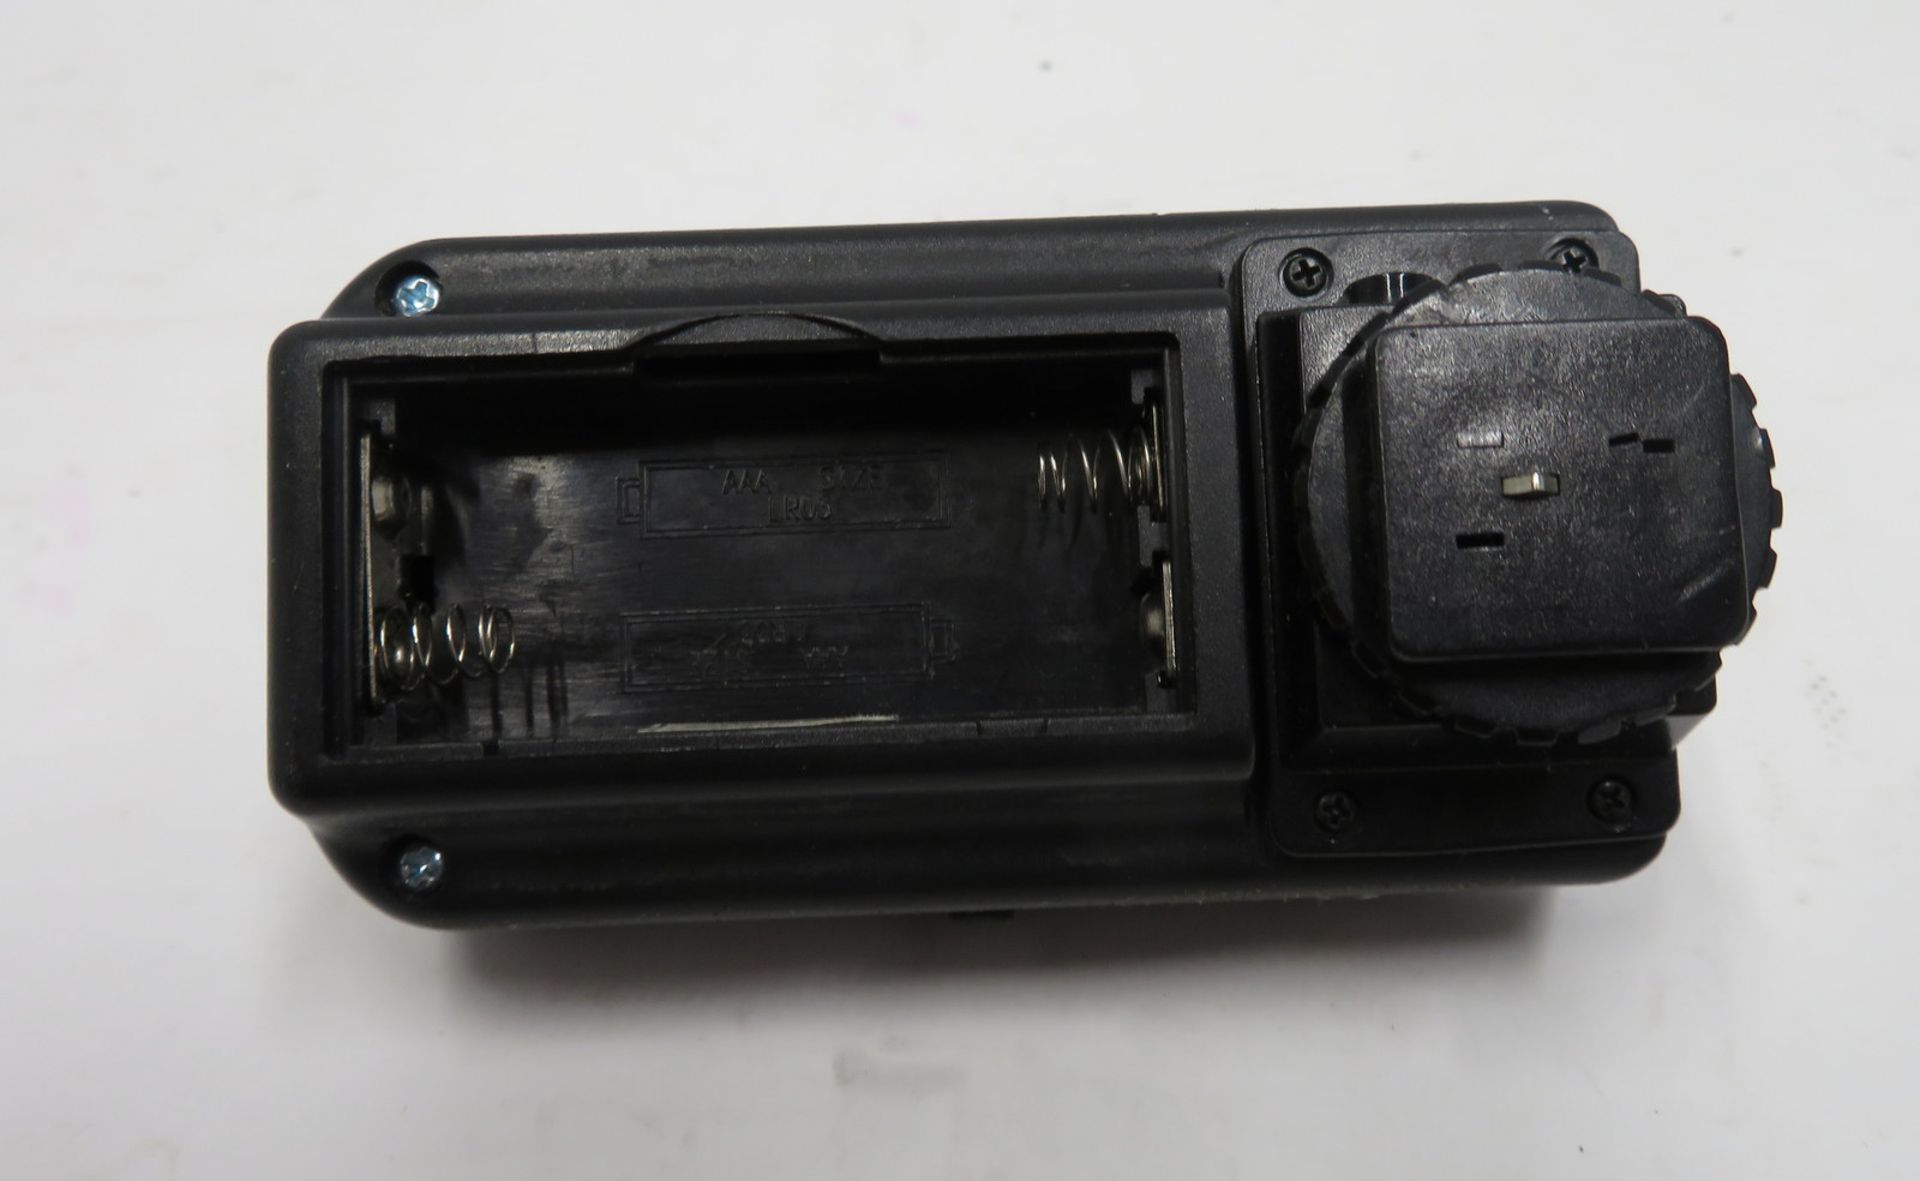 Bowens Pulsar radio trigger system, no battery cover - Image 3 of 3